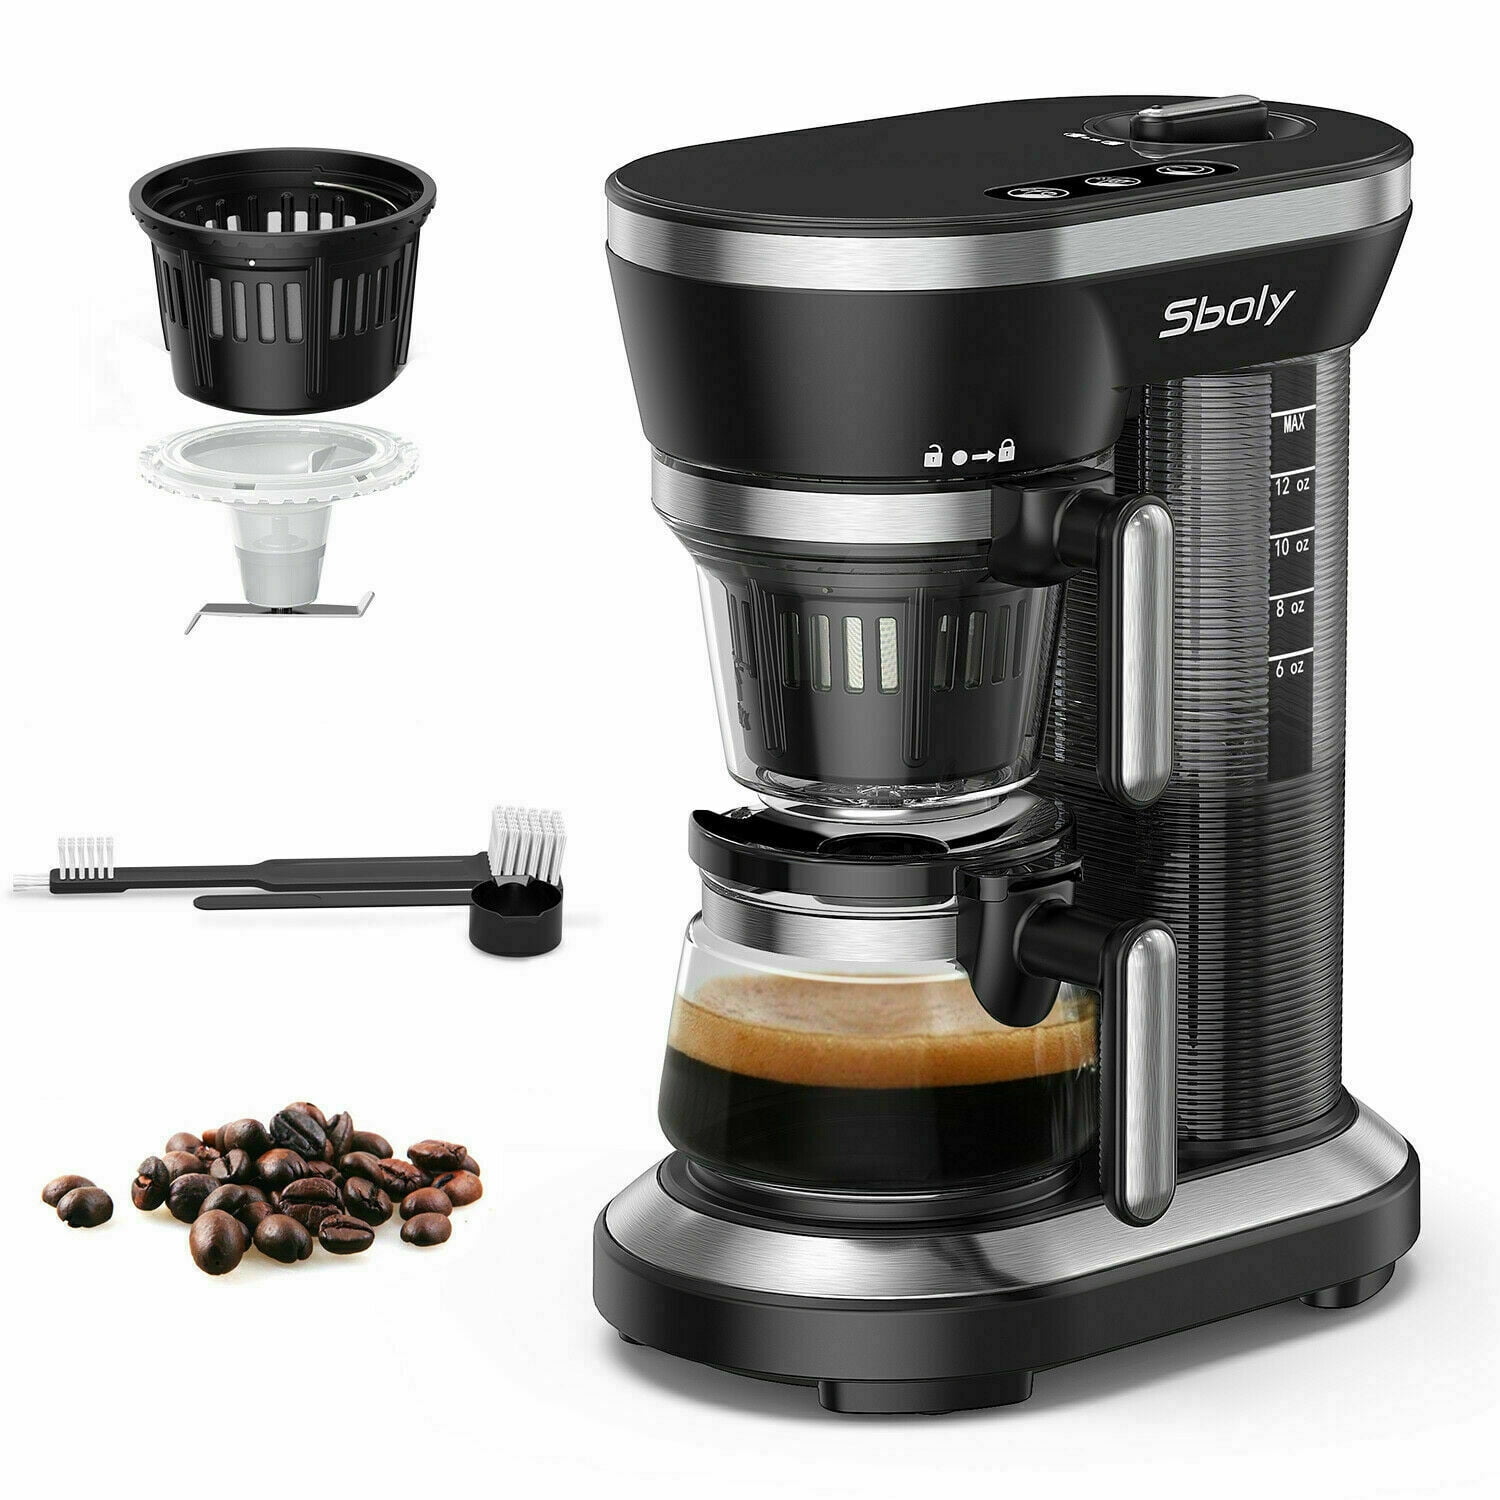 Grind and Brew Automatic Coffee Machine Single Cup Coffee Maker